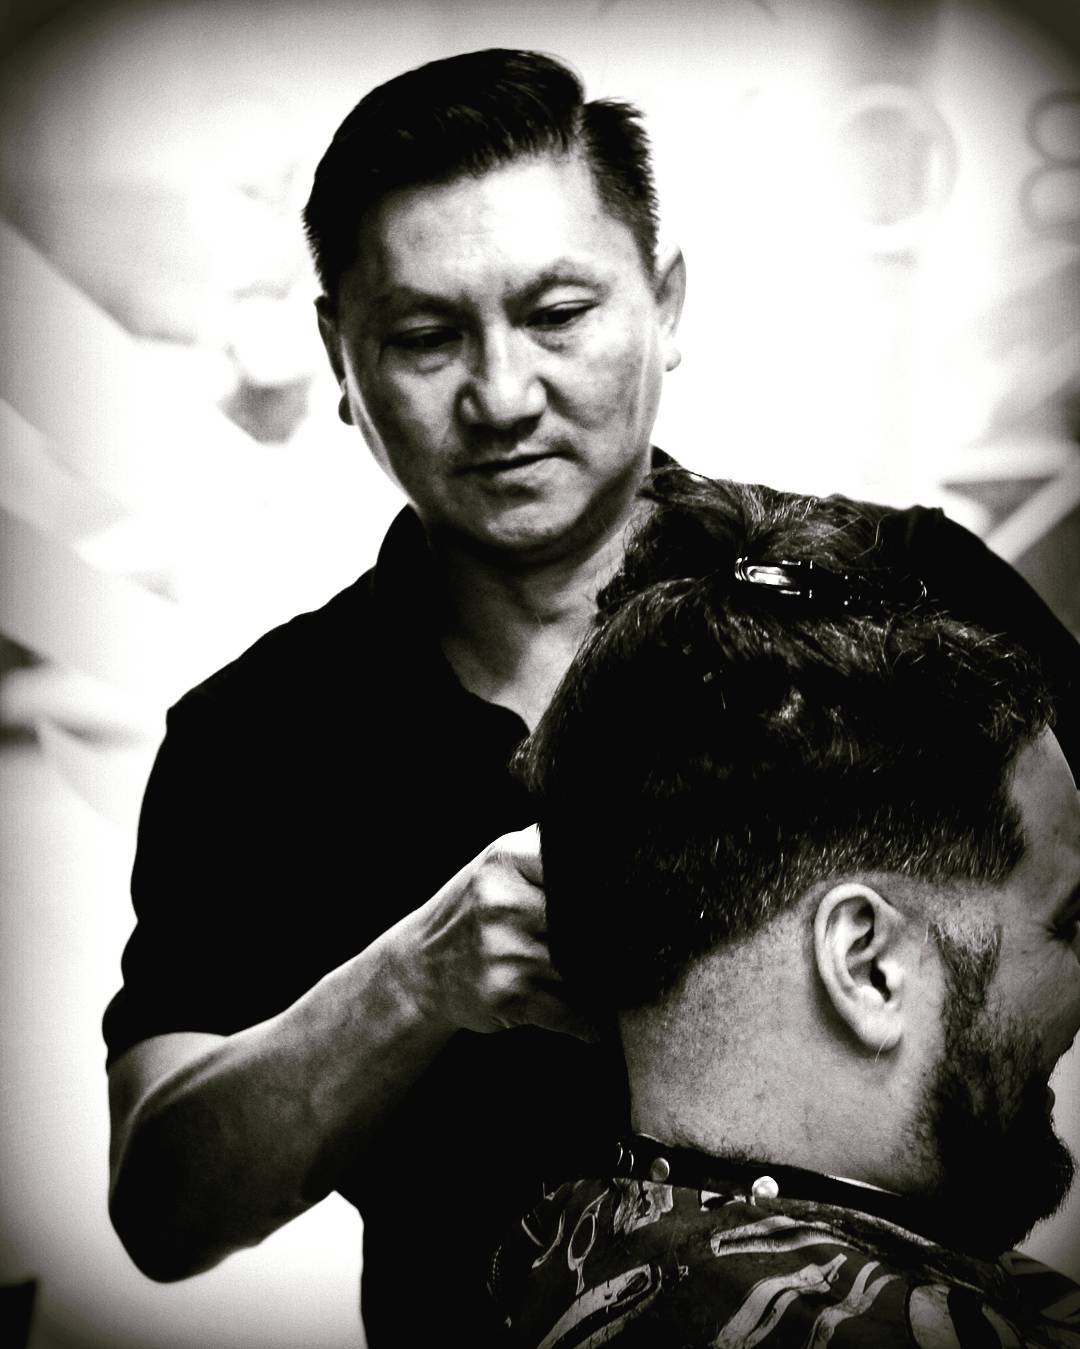 Looking for your favourite neighbourhood barbers in the Yonge st.  Church st. Village? Look for Donnie at Boyd's! #yongestreet #churchstreet #barber #toronto #yongestreet #haircut #collegettc #fade #headdesign #hotshave